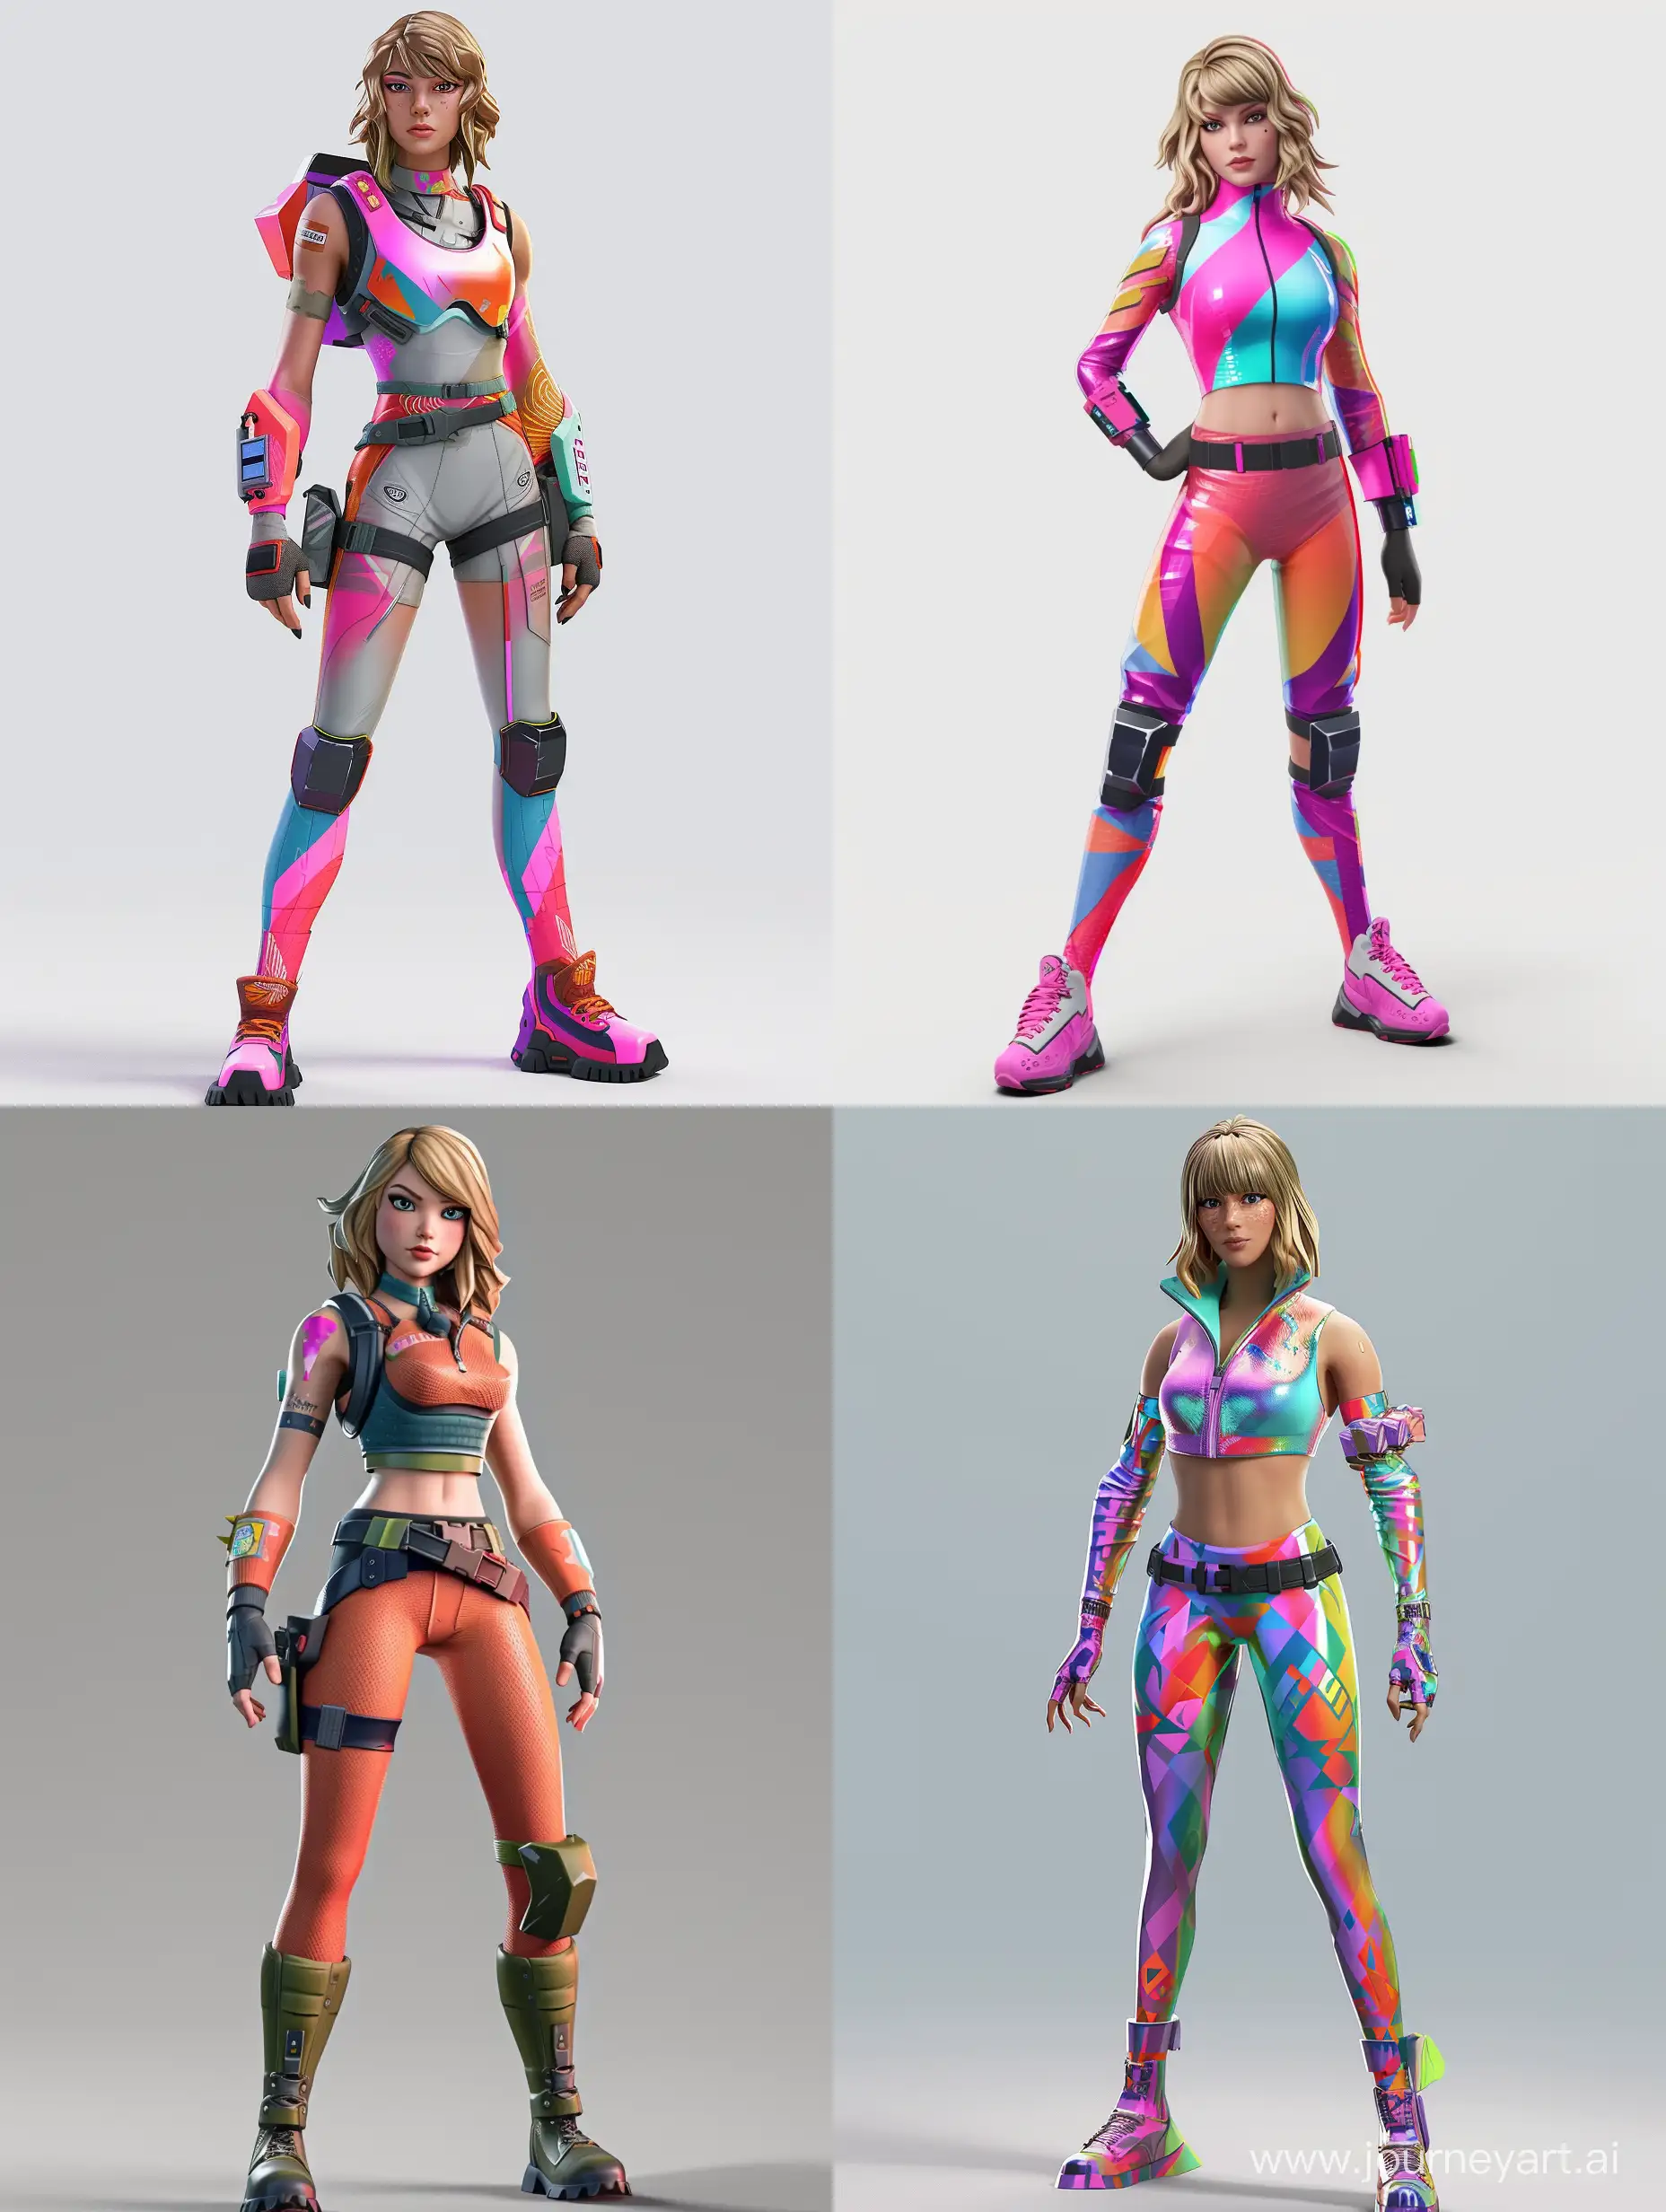 Taylor swift as a fortnite character, full body, 3d render, colorful